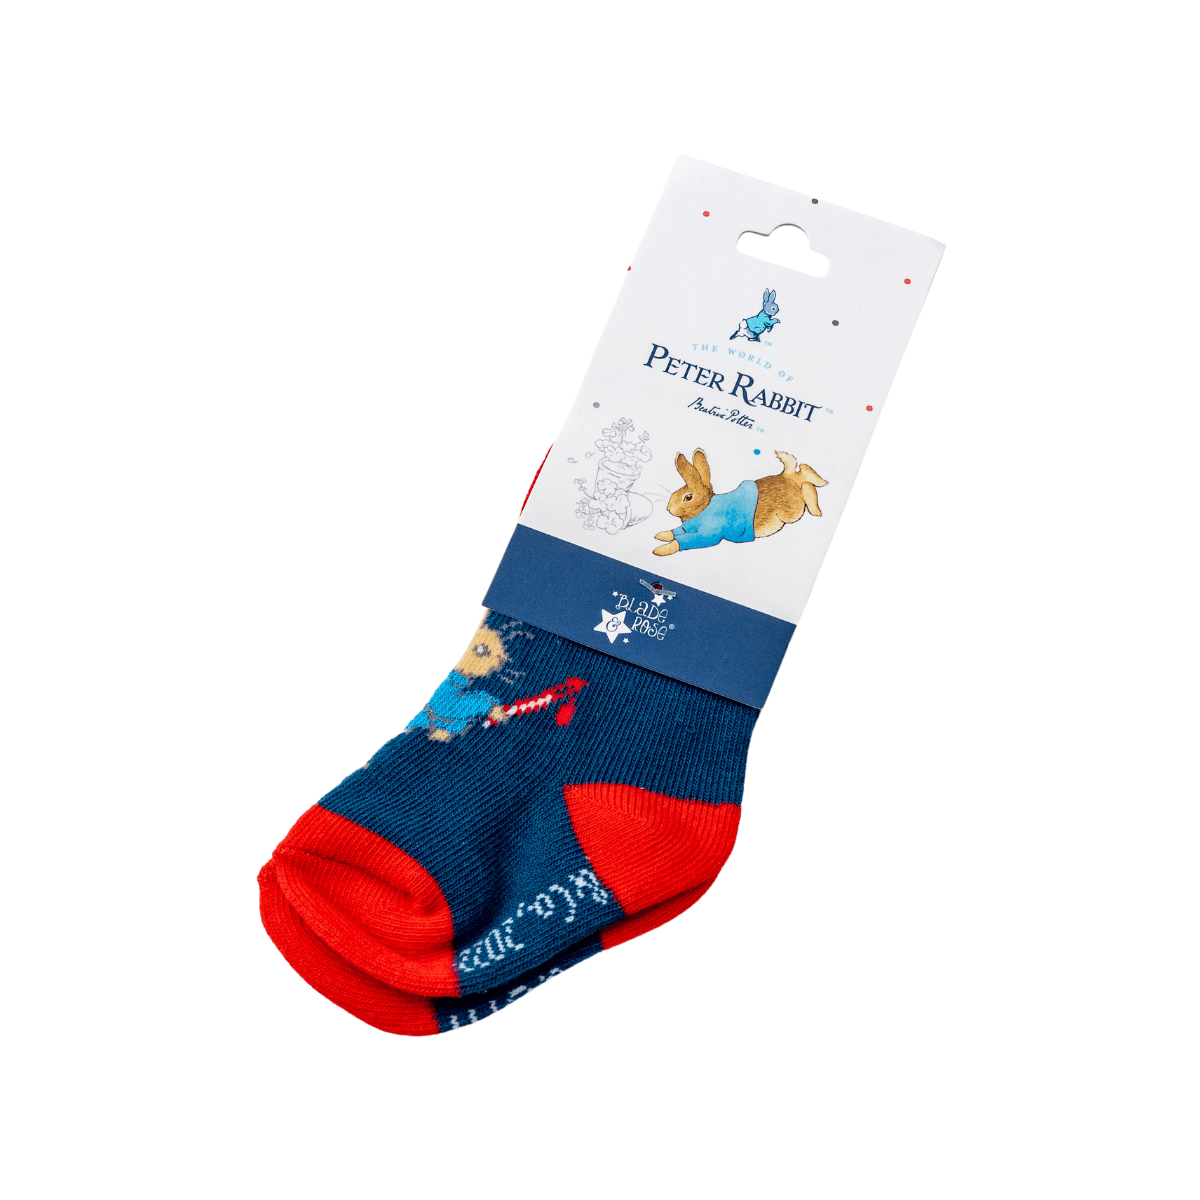 Peter Rabbit Fun with Paint Socks Size 0-6 months